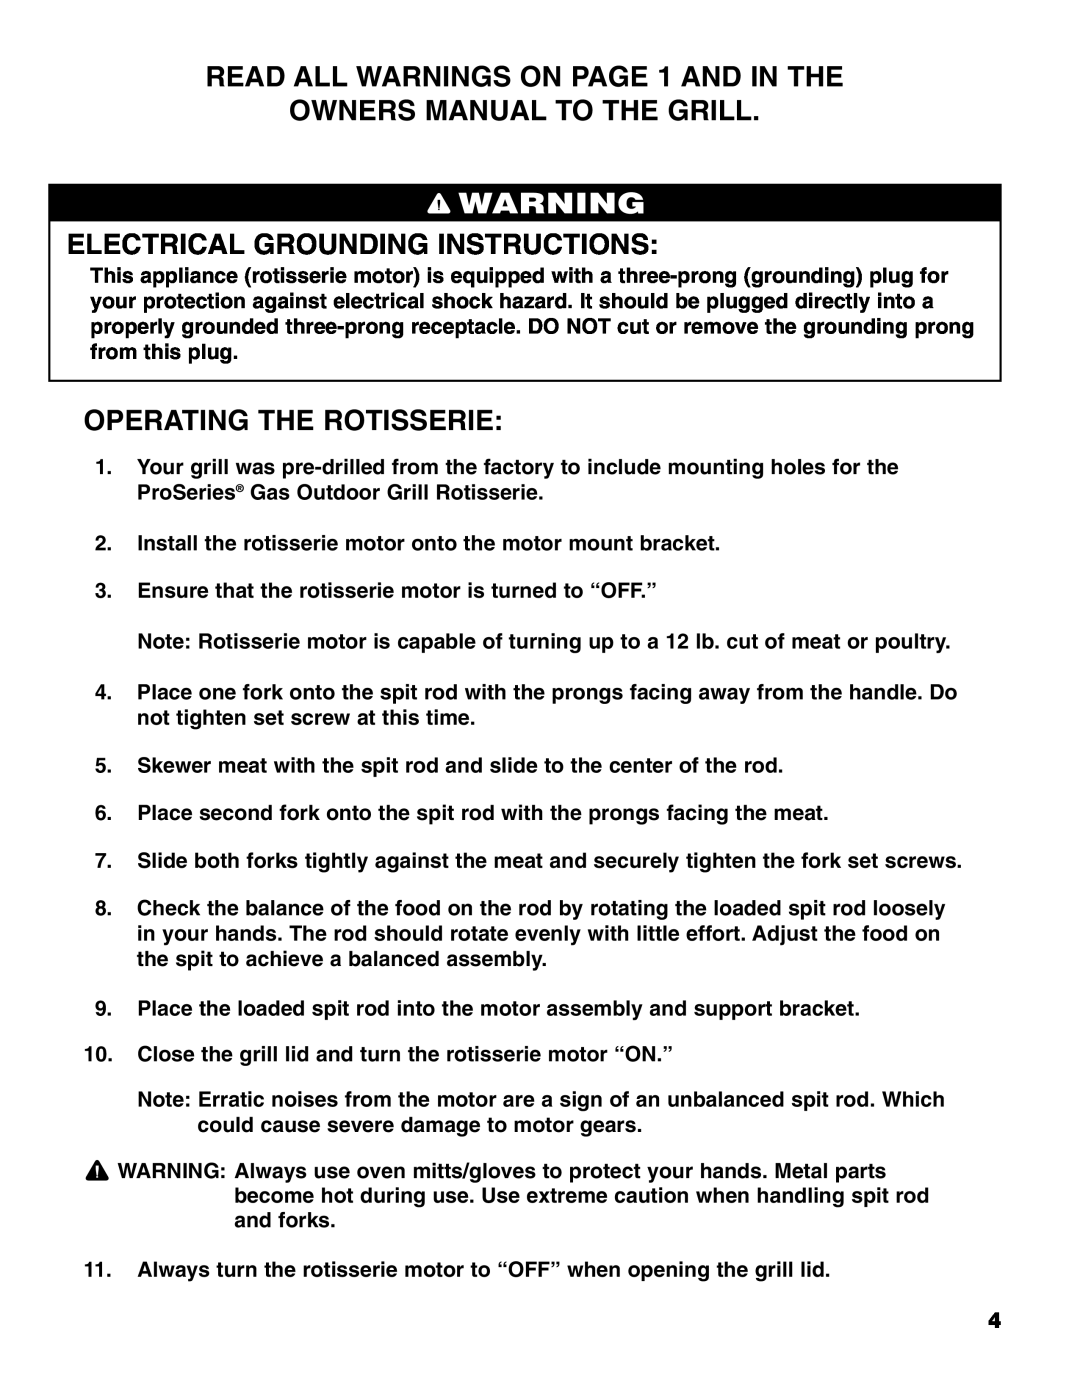 Brinkmann ProSeriesTM owner manual Operating The Rotisserie, Electrical Grounding Instructions 